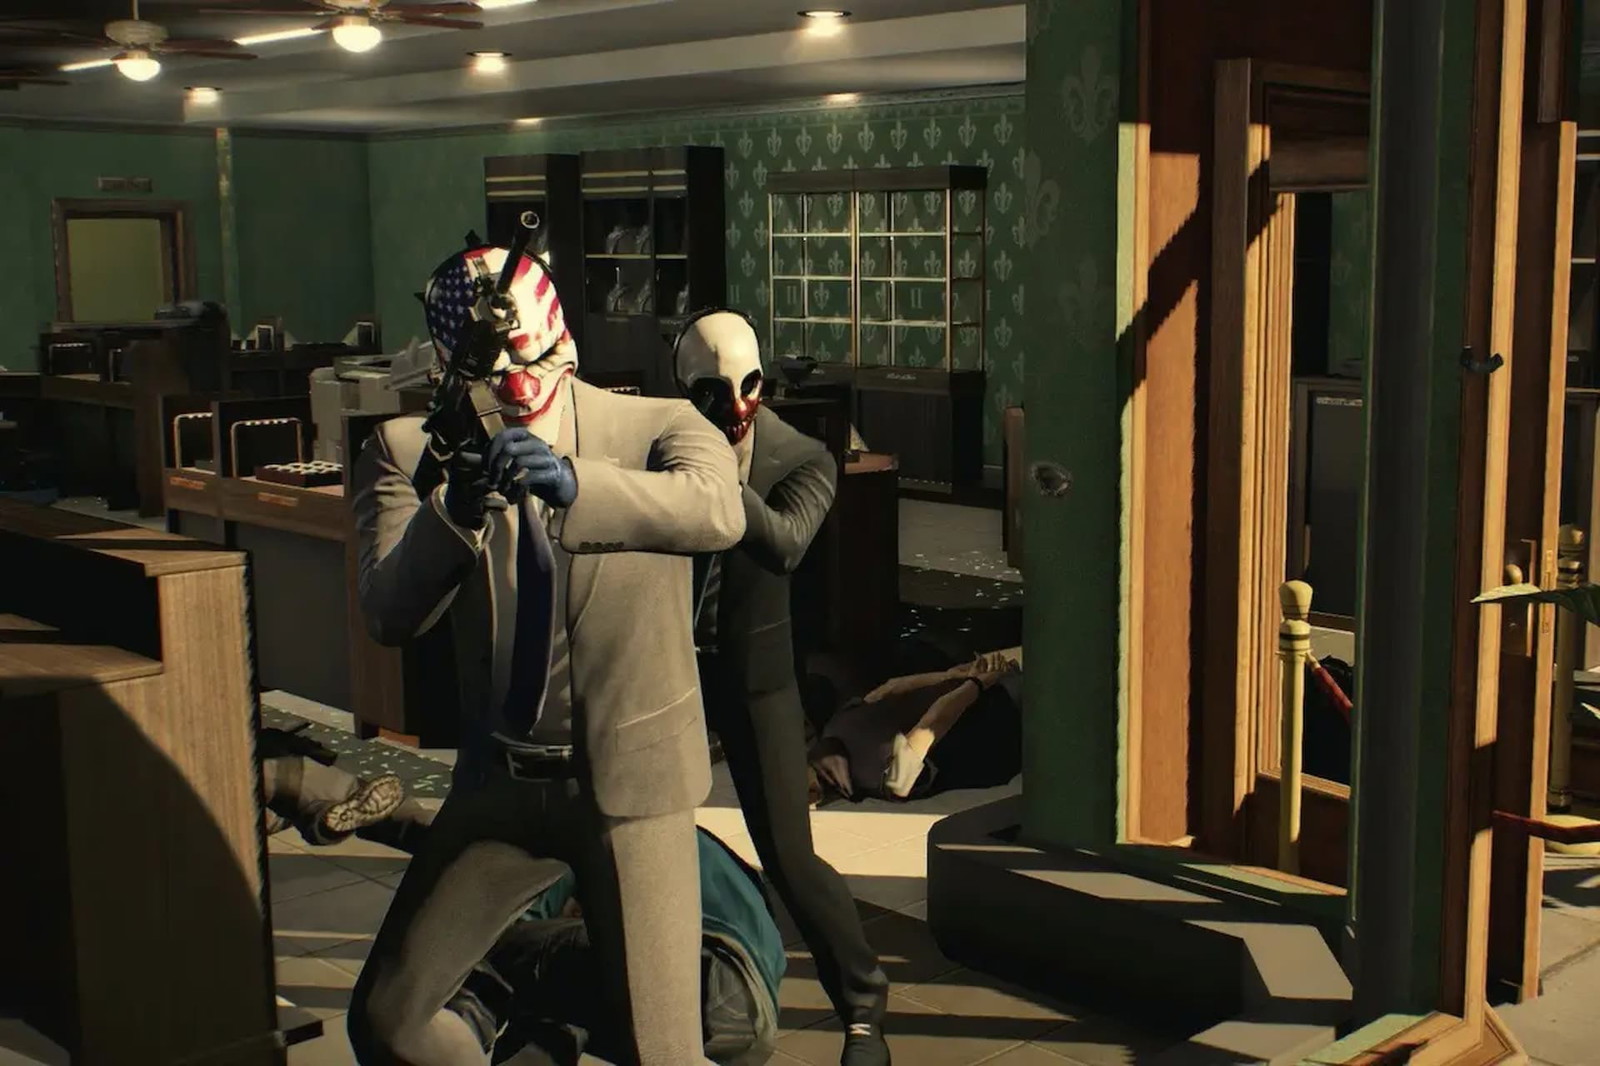 Players are also facing unable to login and failed to fetch game config data issues among others in Payday 3